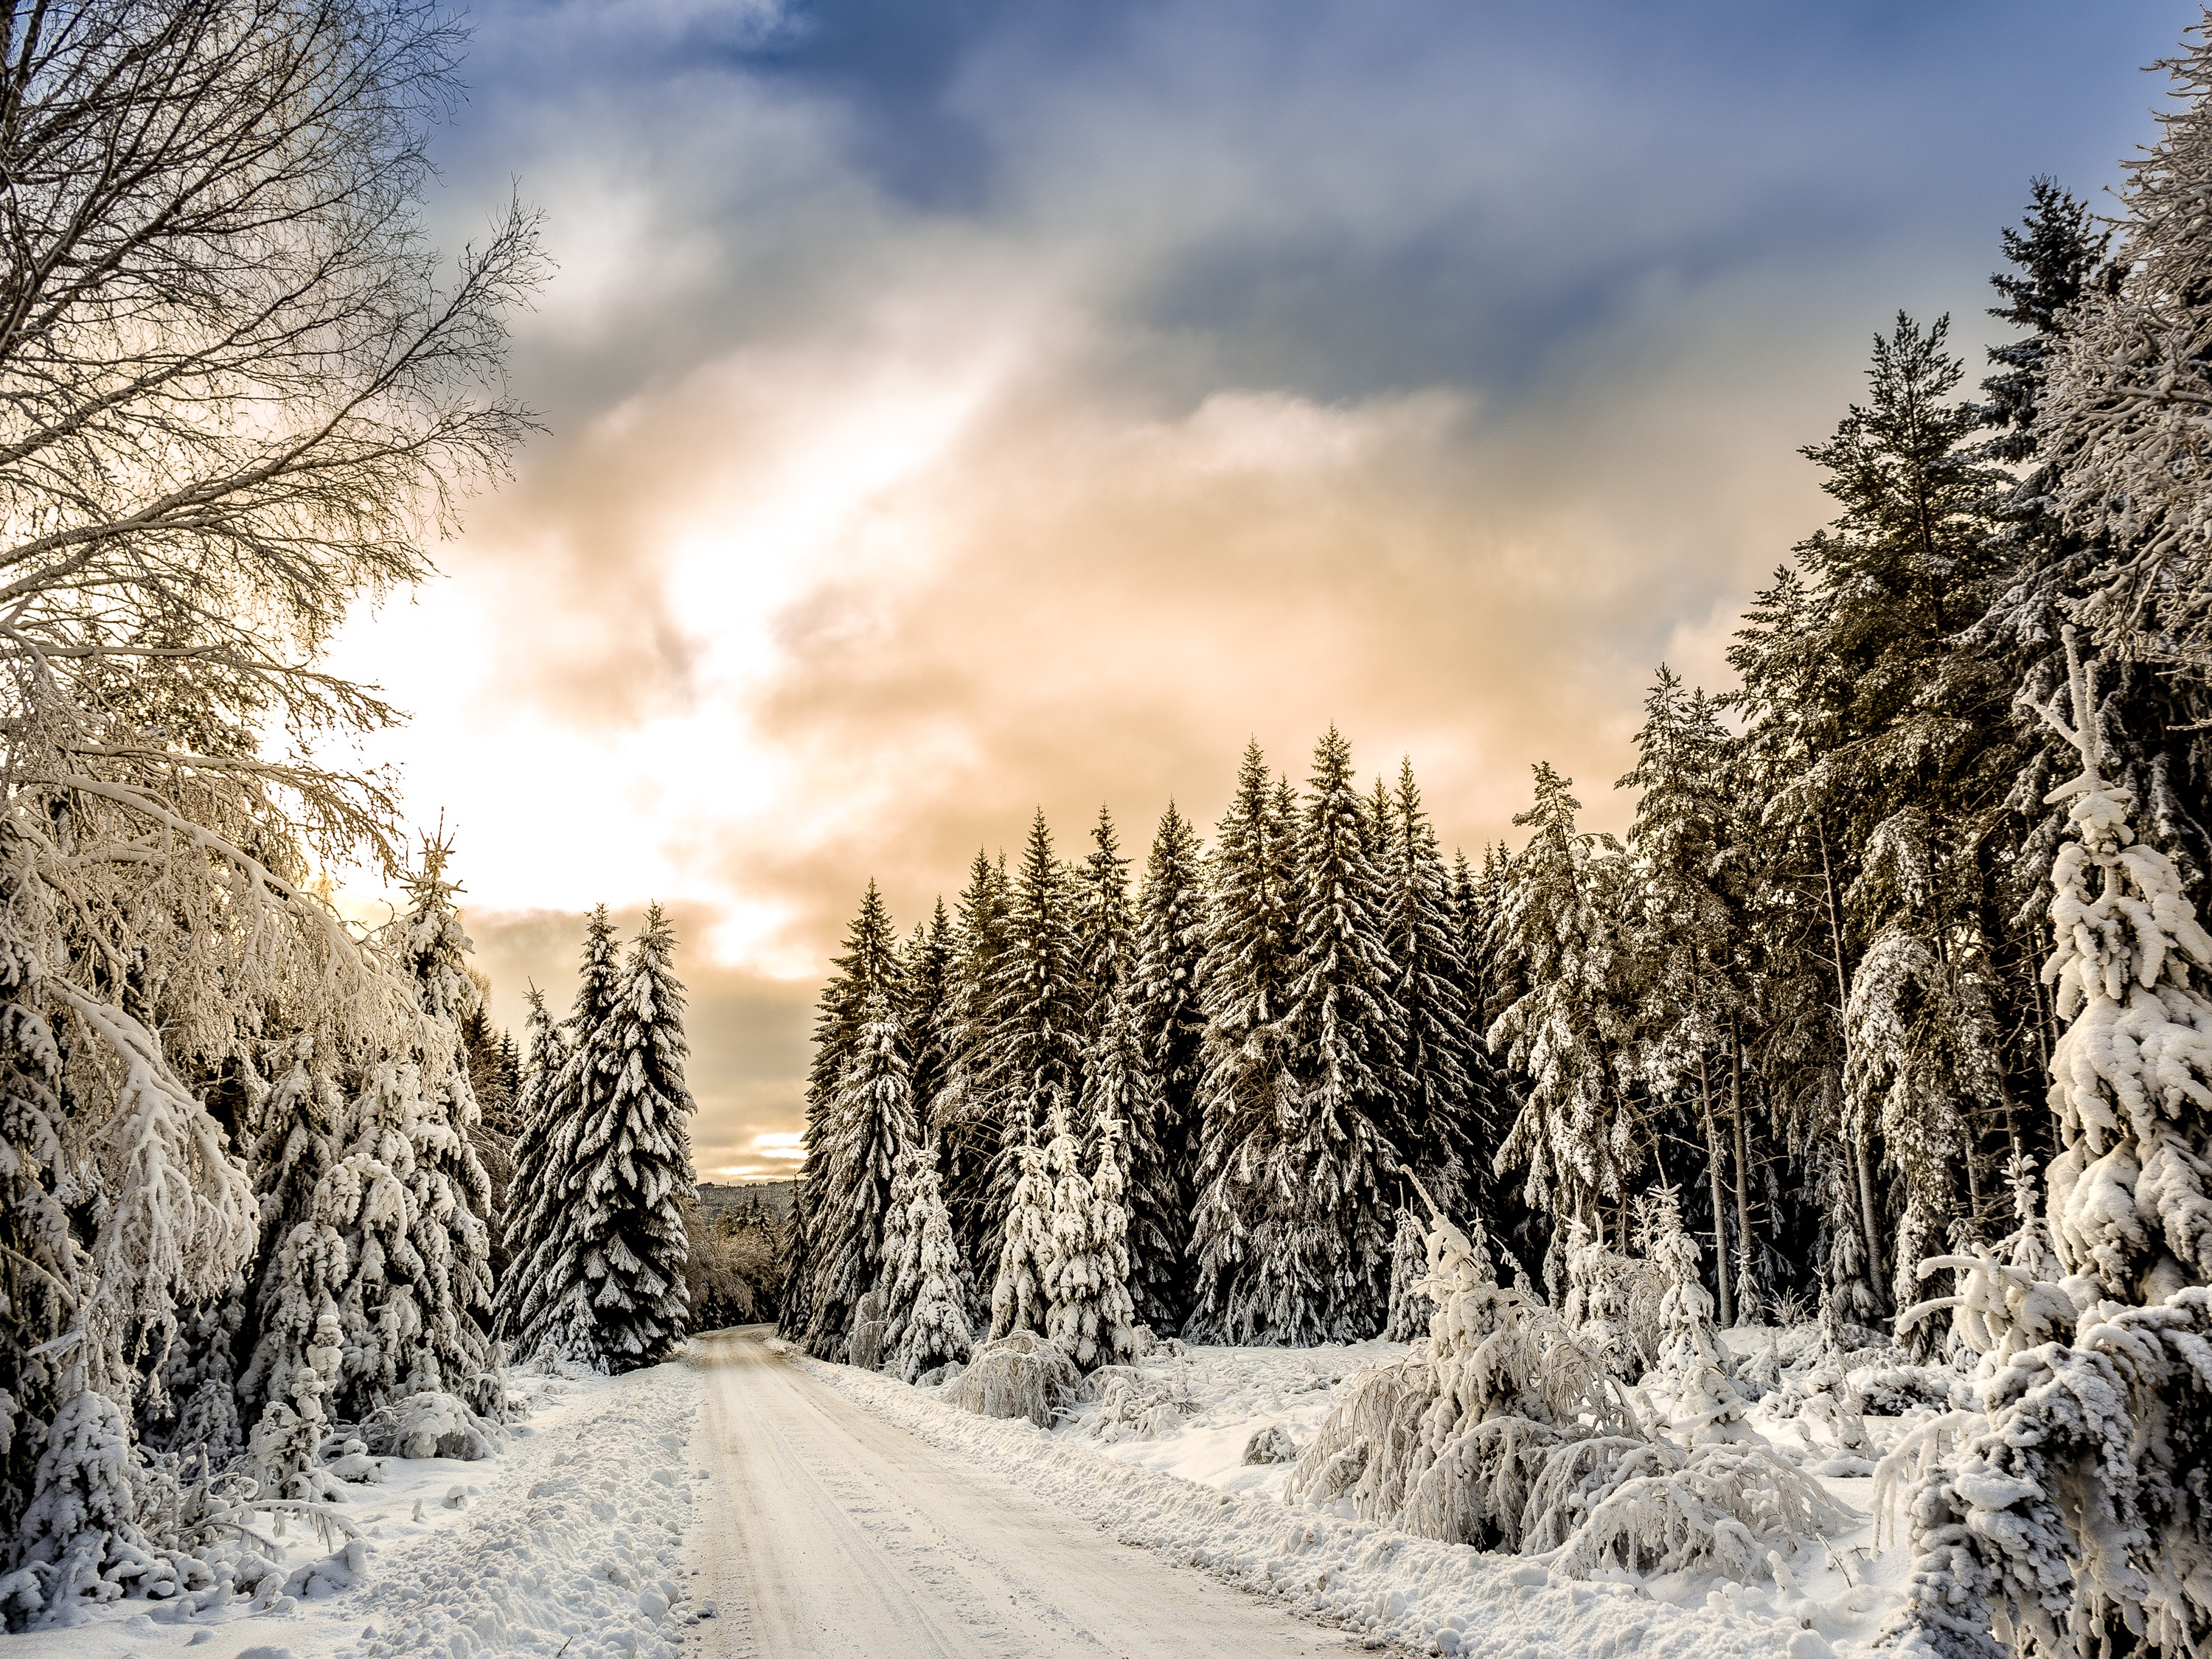 Snow-covered-road-sweden: The importance of getting lost as an expat in Sweden